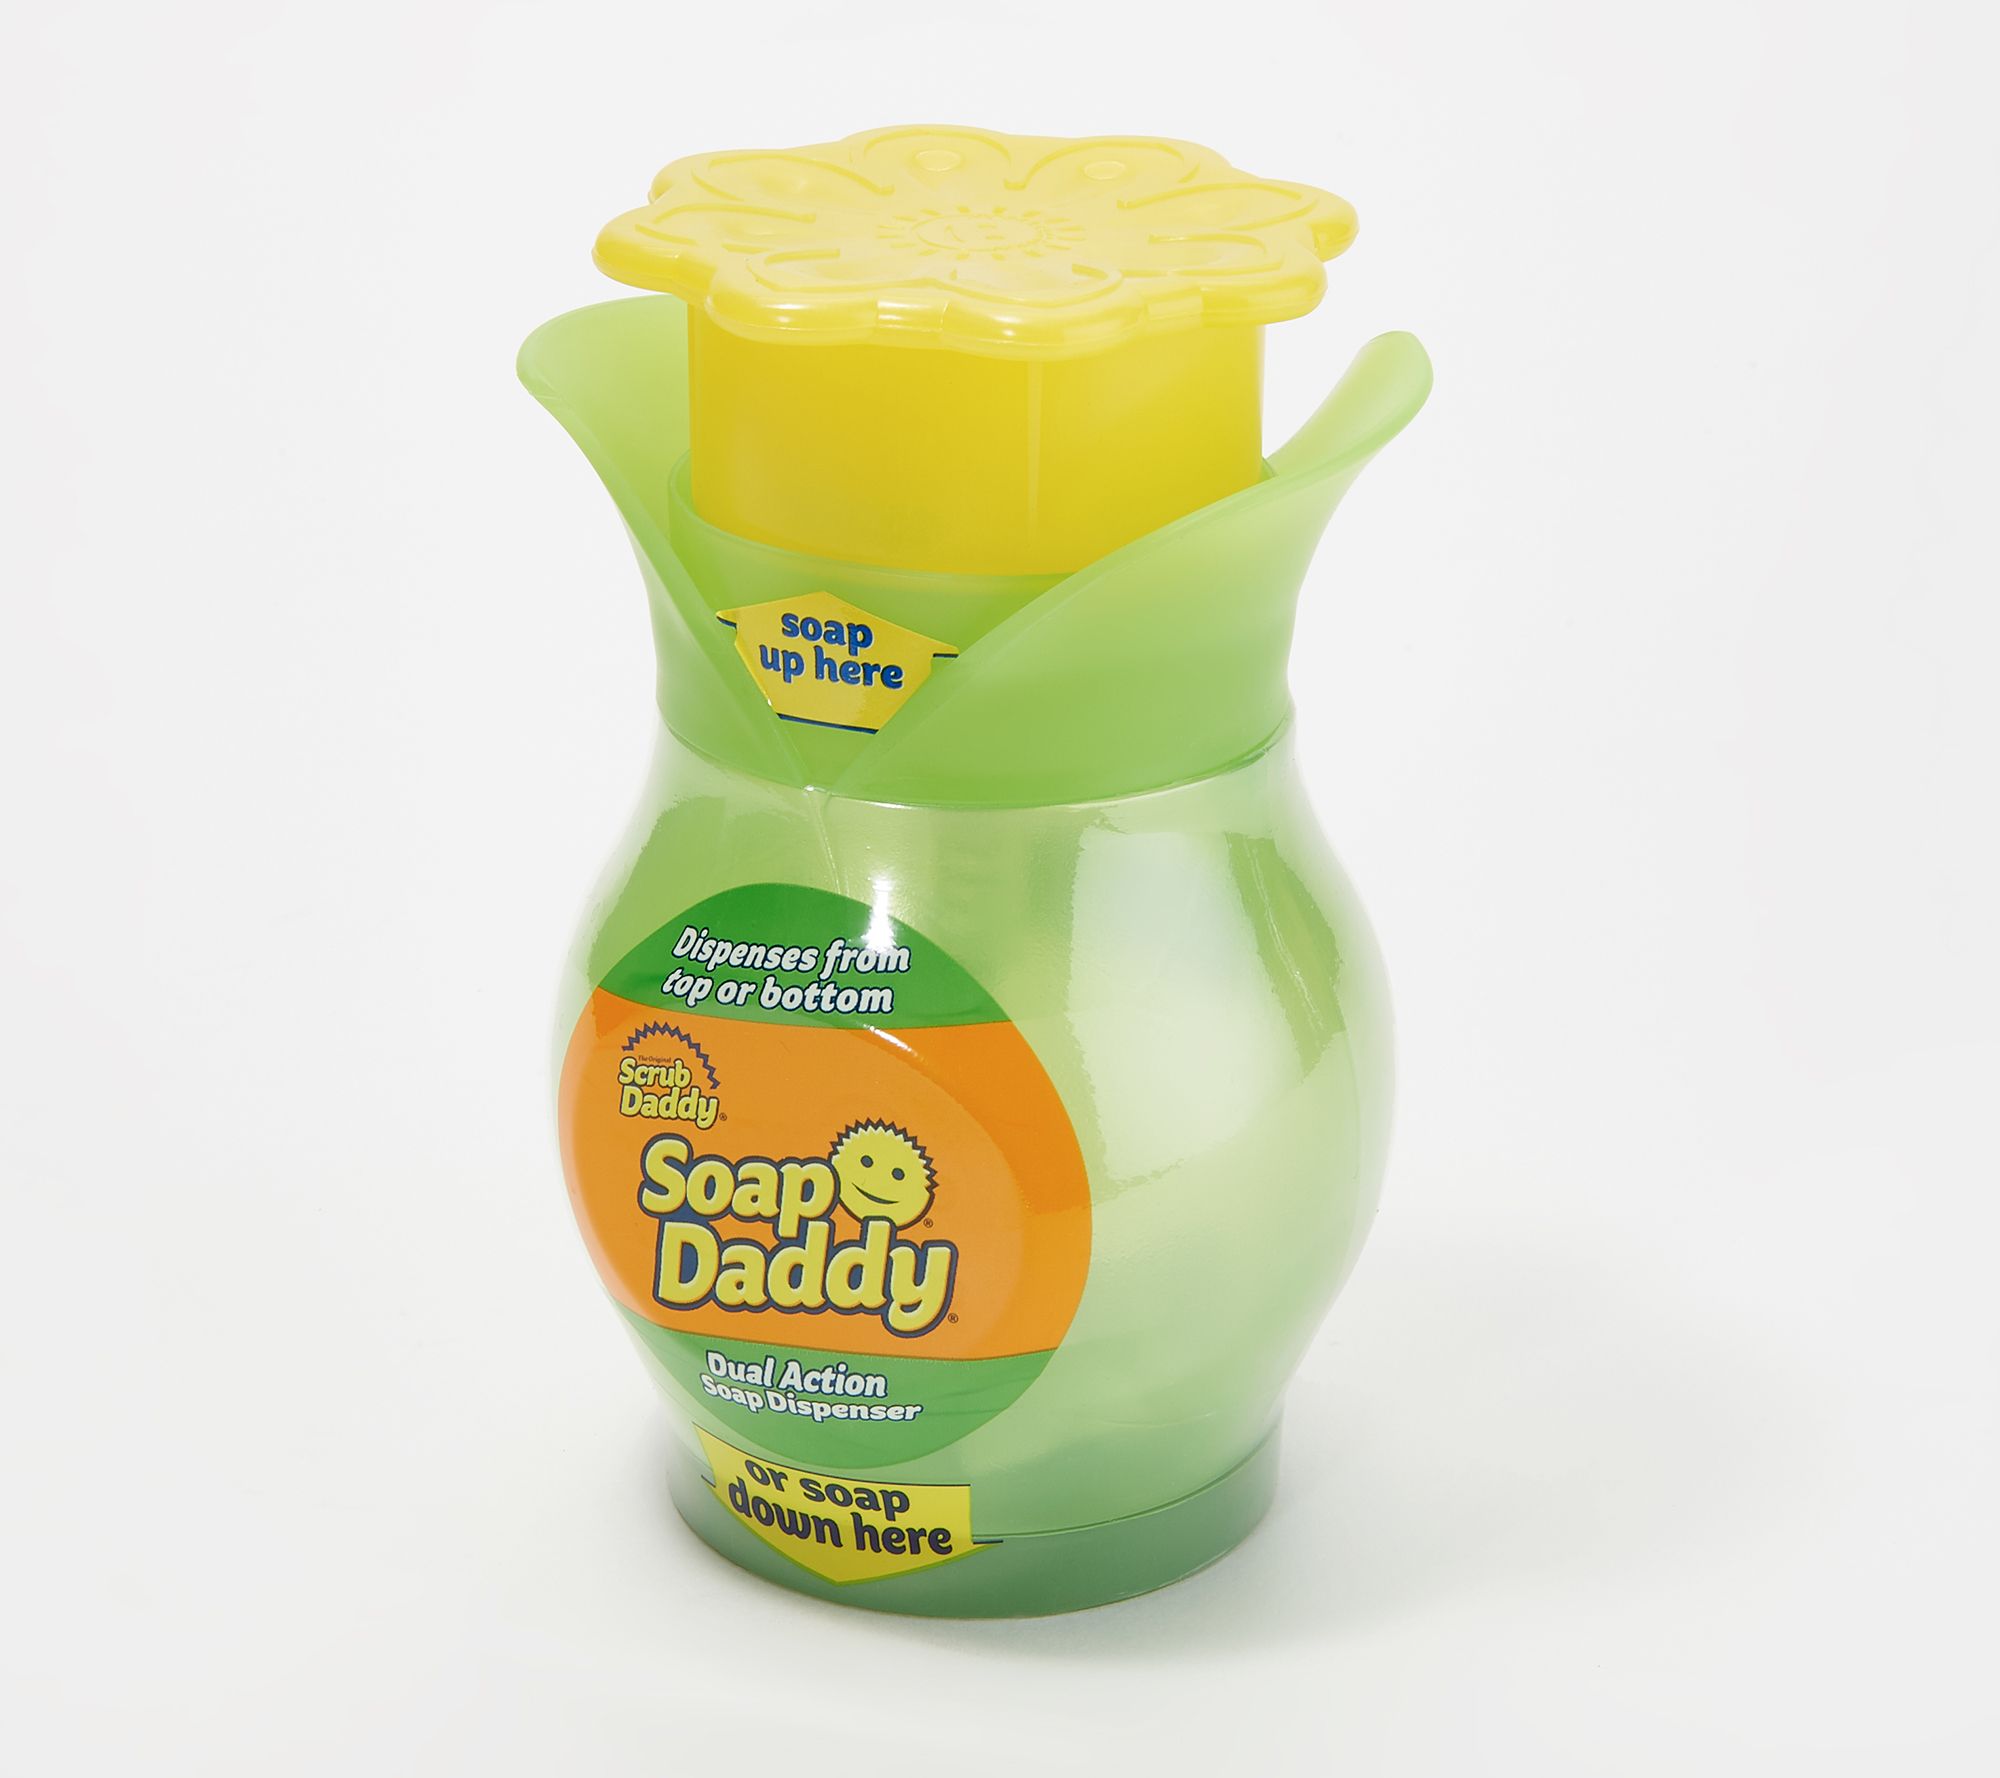 Scrub Daddy 10 pc Variety Lemon Lime Scented Sponges w/ Accessories 